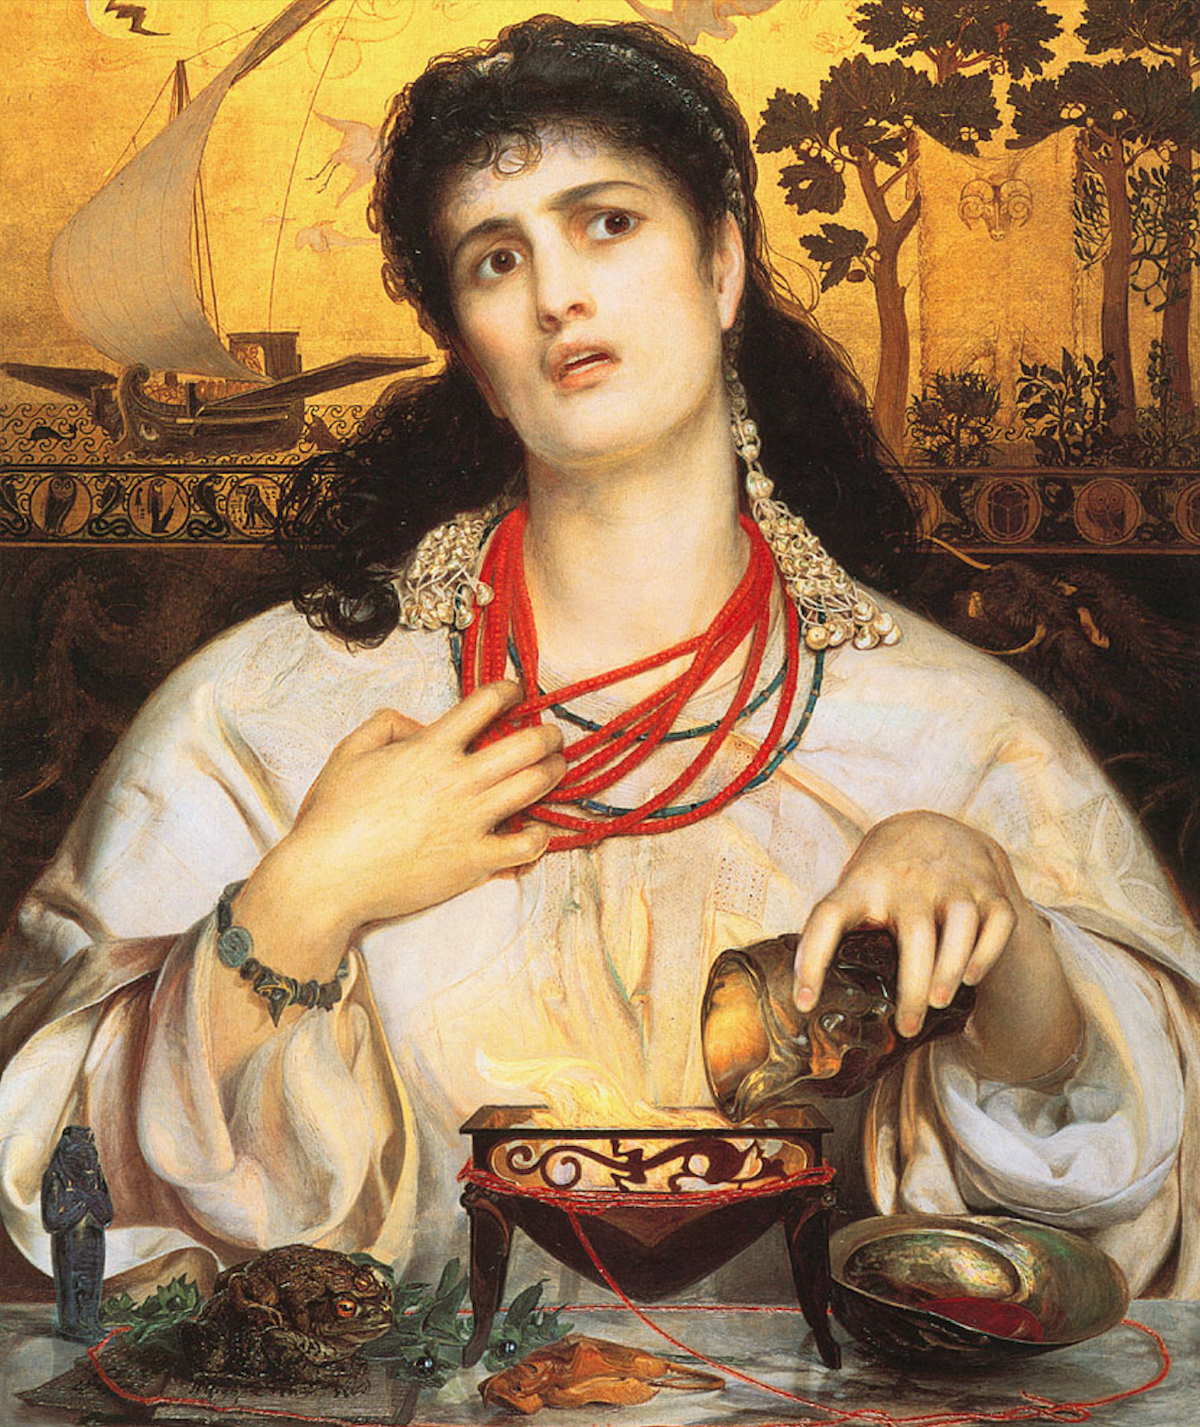 "Medea," painted in the late 1860s by Frederick Sandys.